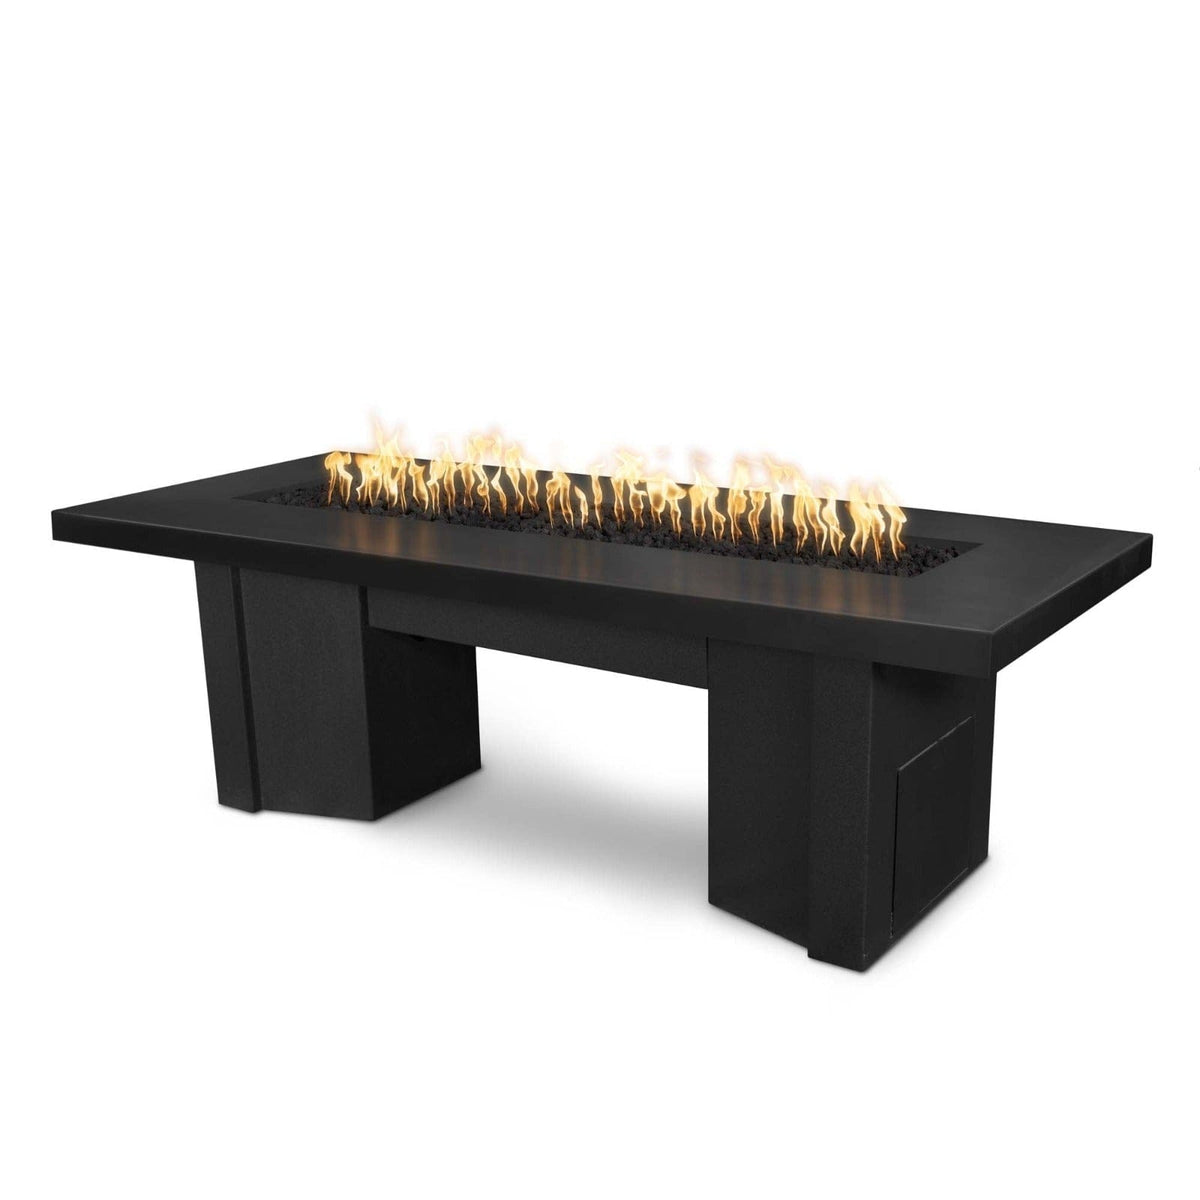 The Outdoor Plus Fire Features Black (-BLK) / Black Powder Coated Steel (-BLK) The Outdoor Plus 60&quot; Alameda Fire Table Smooth Concrete in Liquid Propane - Flame Sense System with Push Button Spark Igniter / OPT-ALMGFRC60FSEN-LP